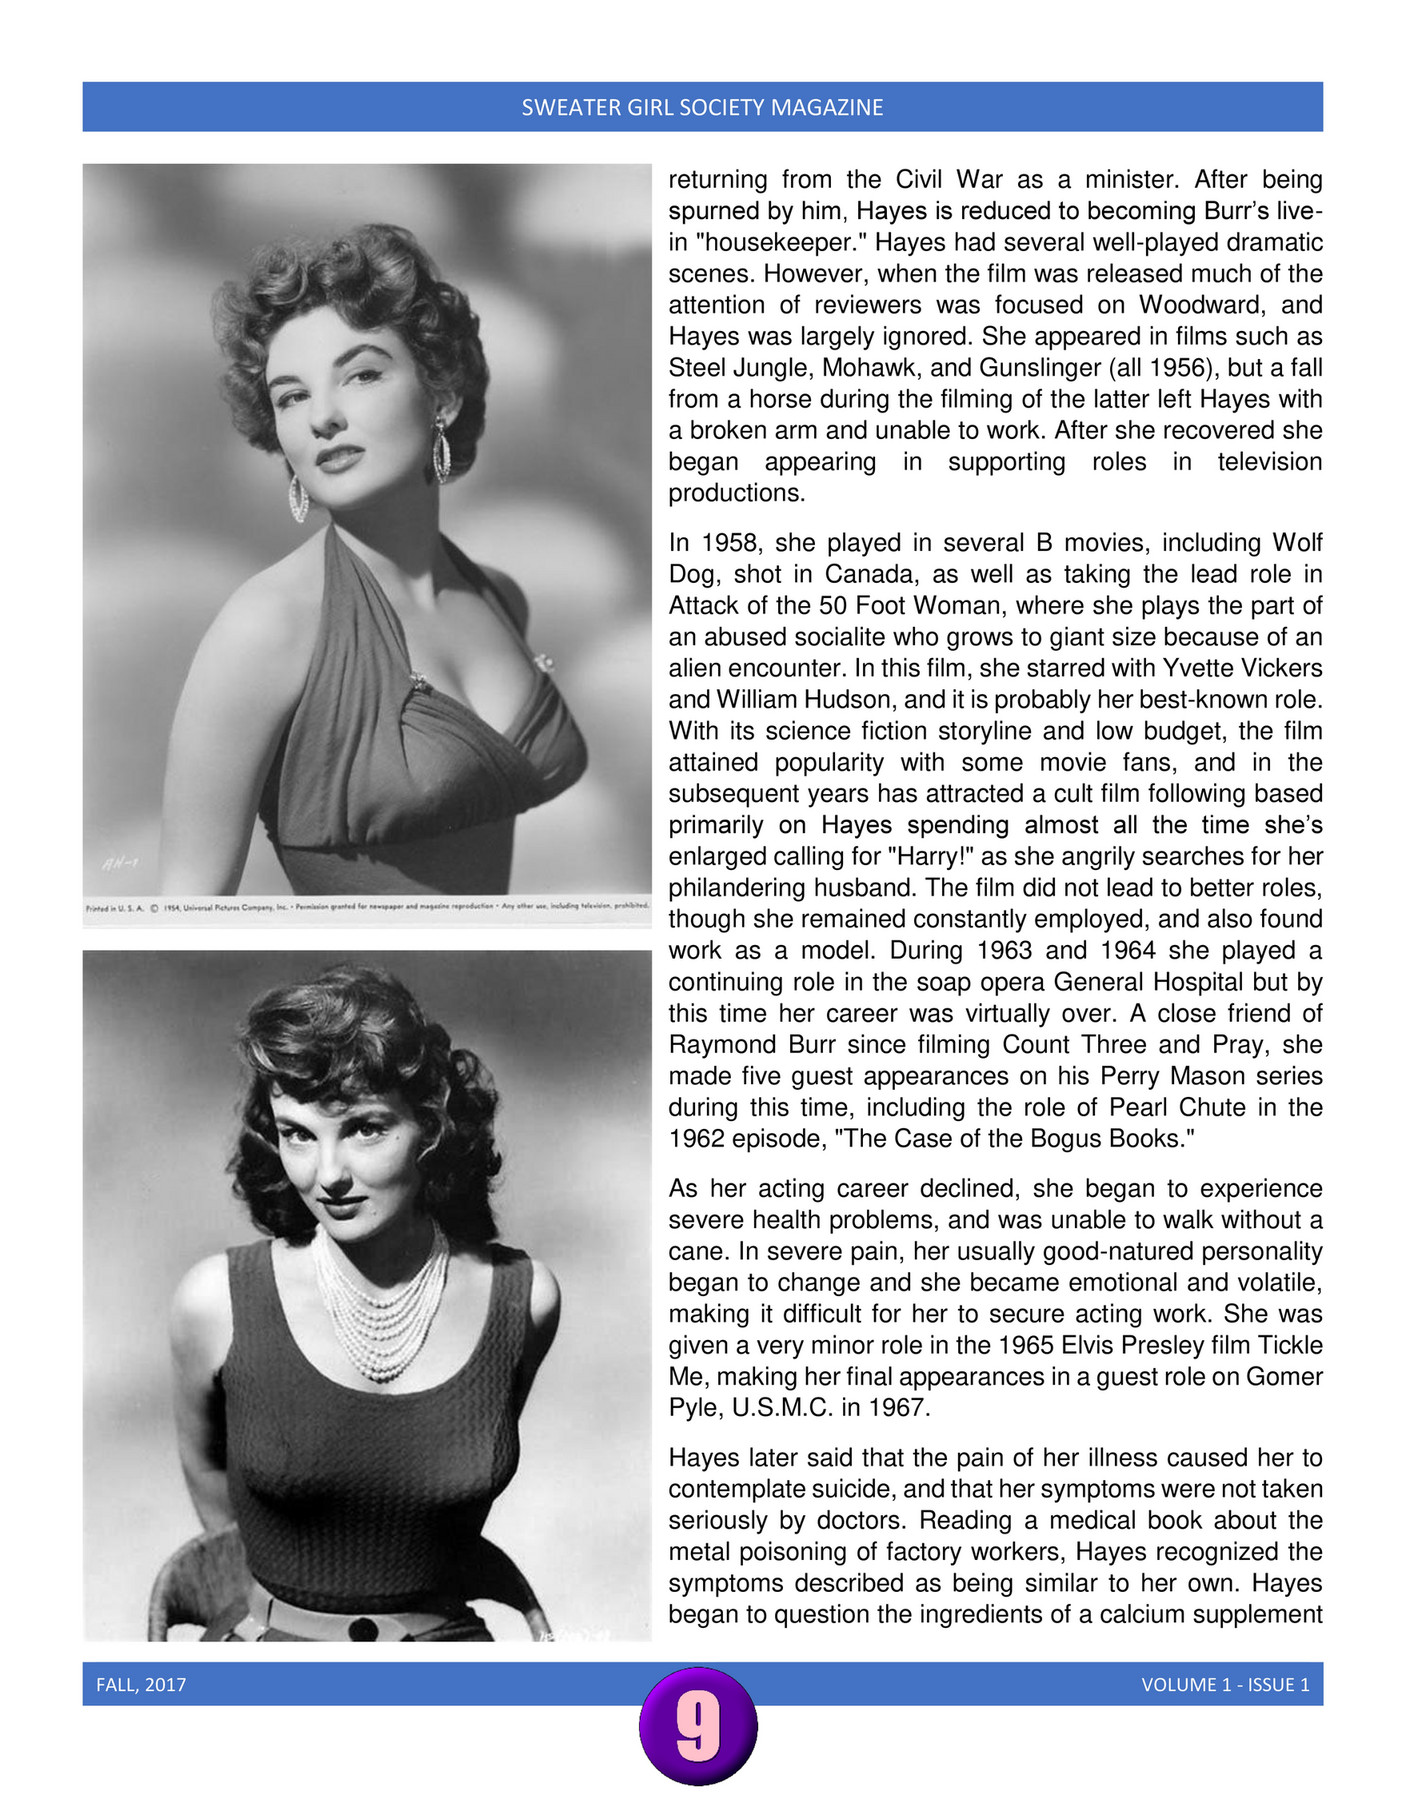 Sweater Girl Society Magazine - Page 1 - Created with Publitas.com